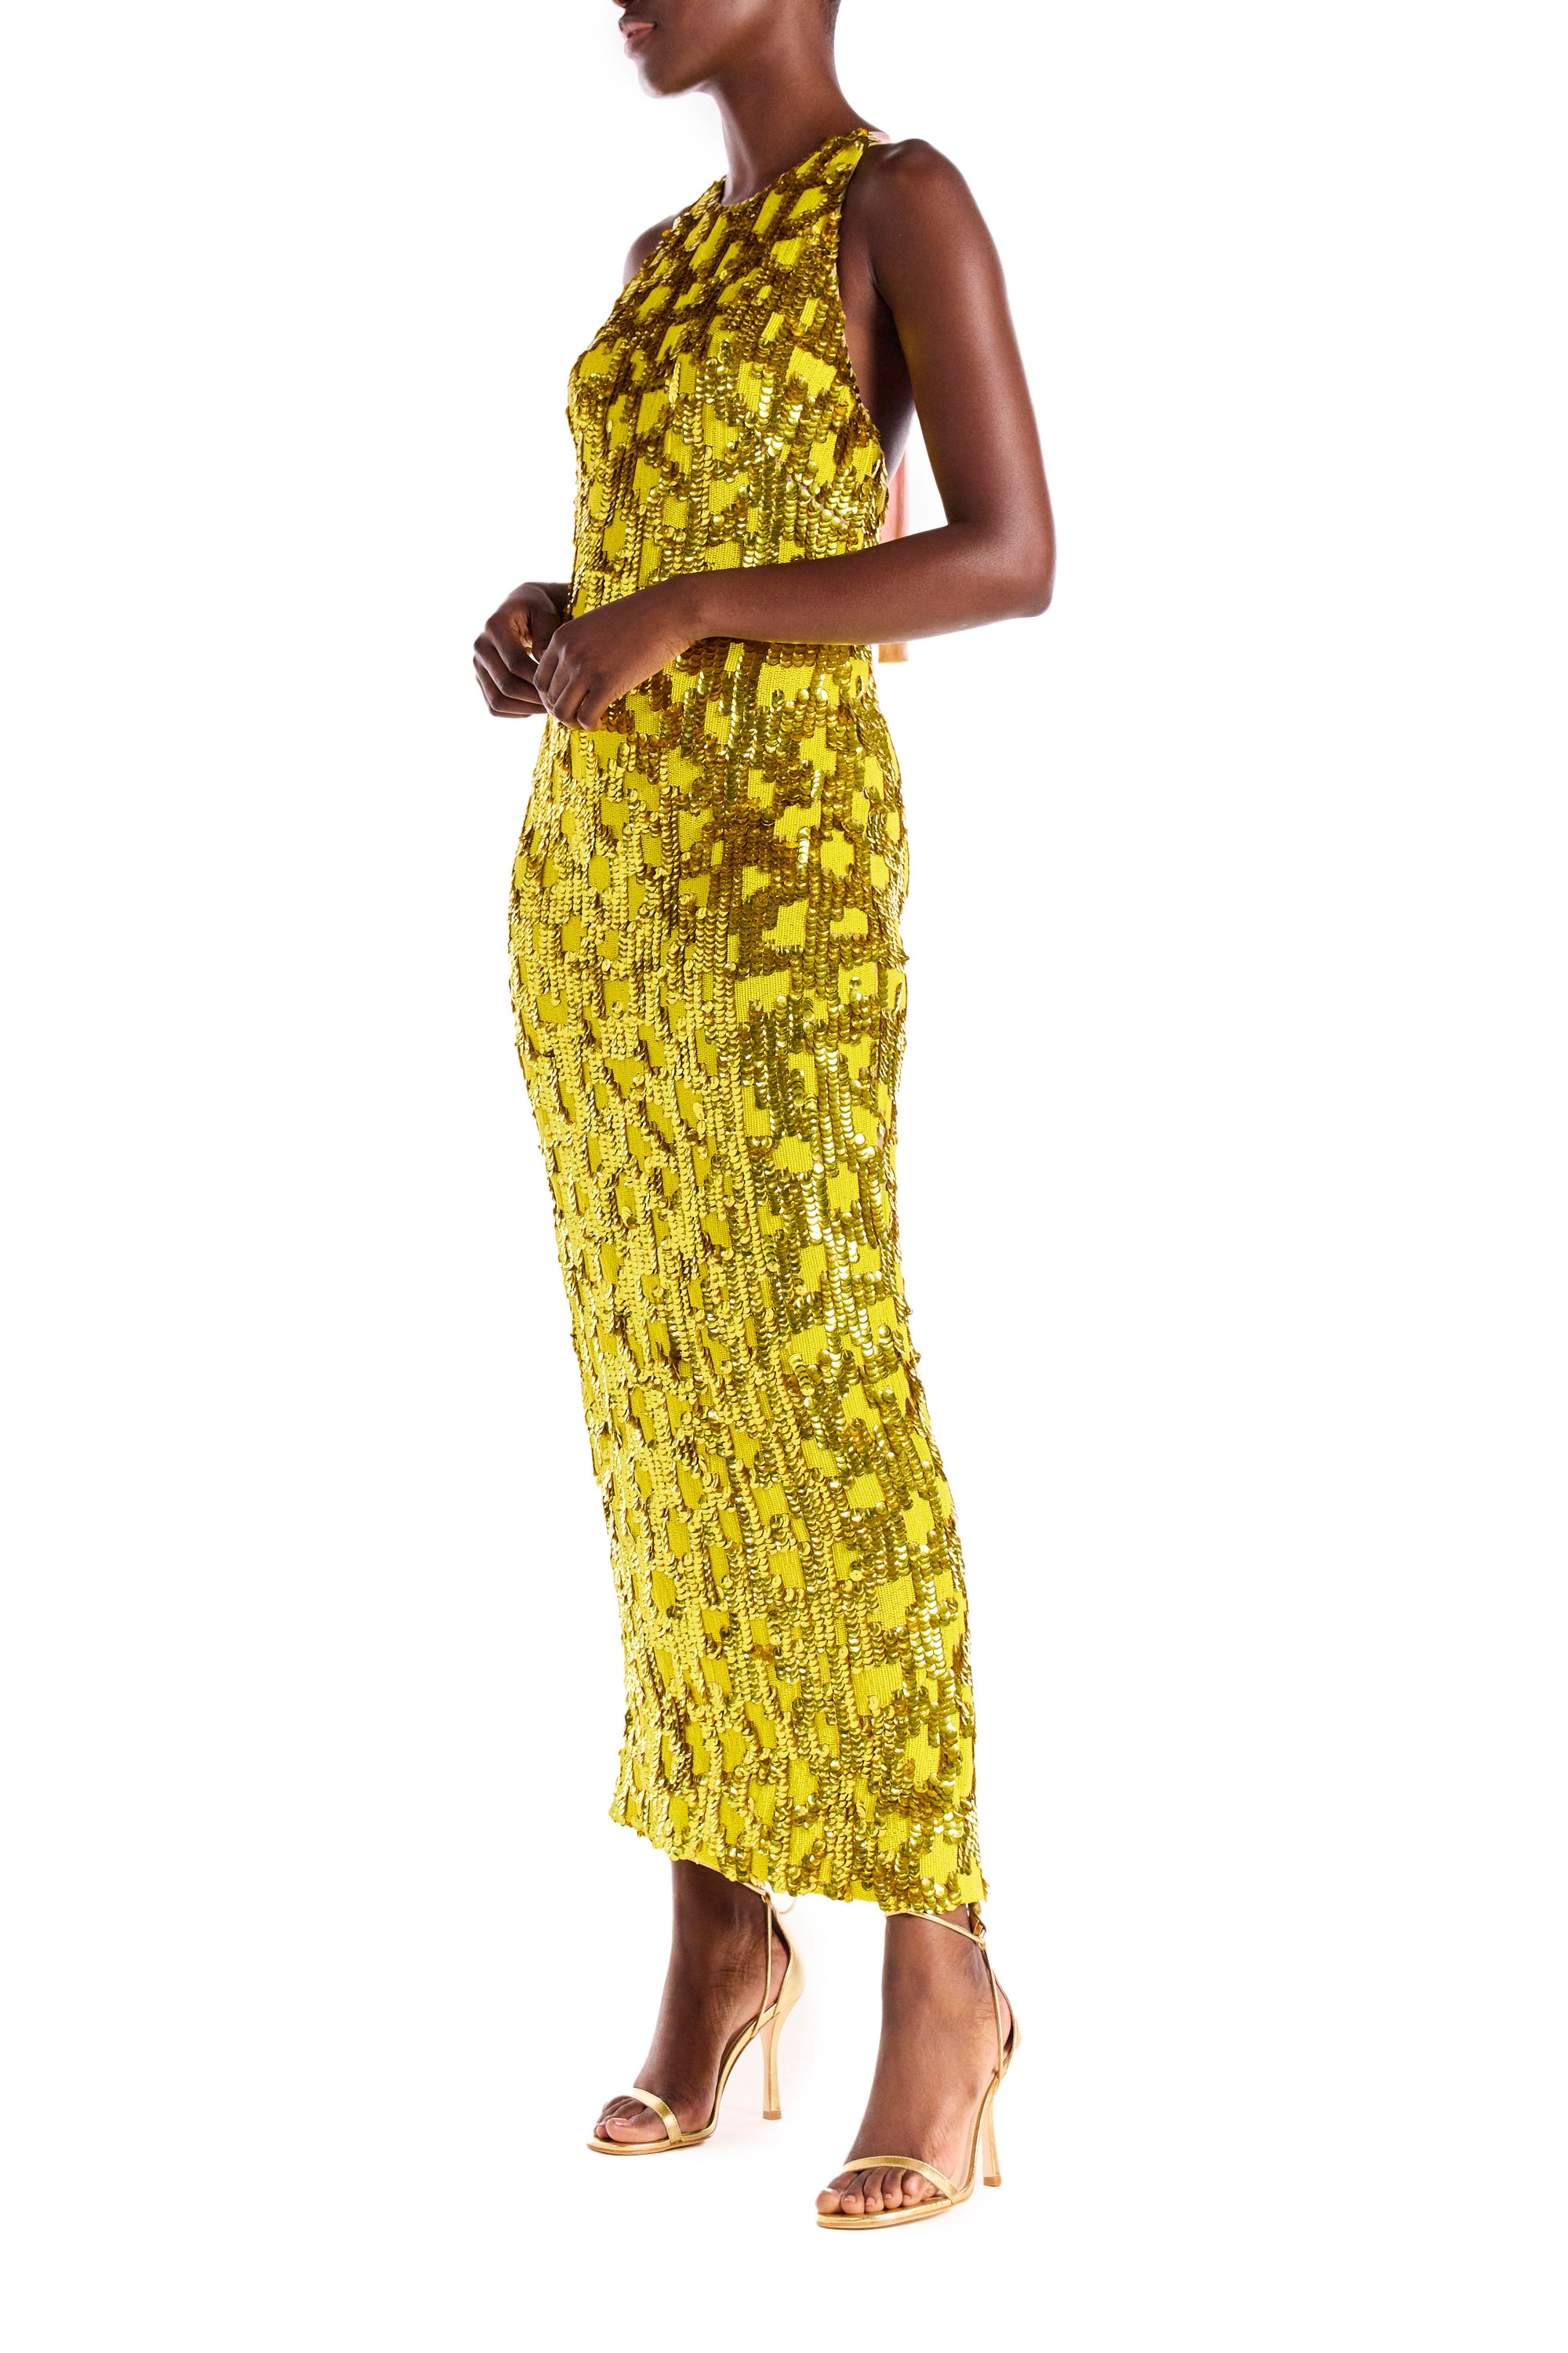 Gold and yellow sequin embroidered dress with pink crepe-back satin tie at the back.